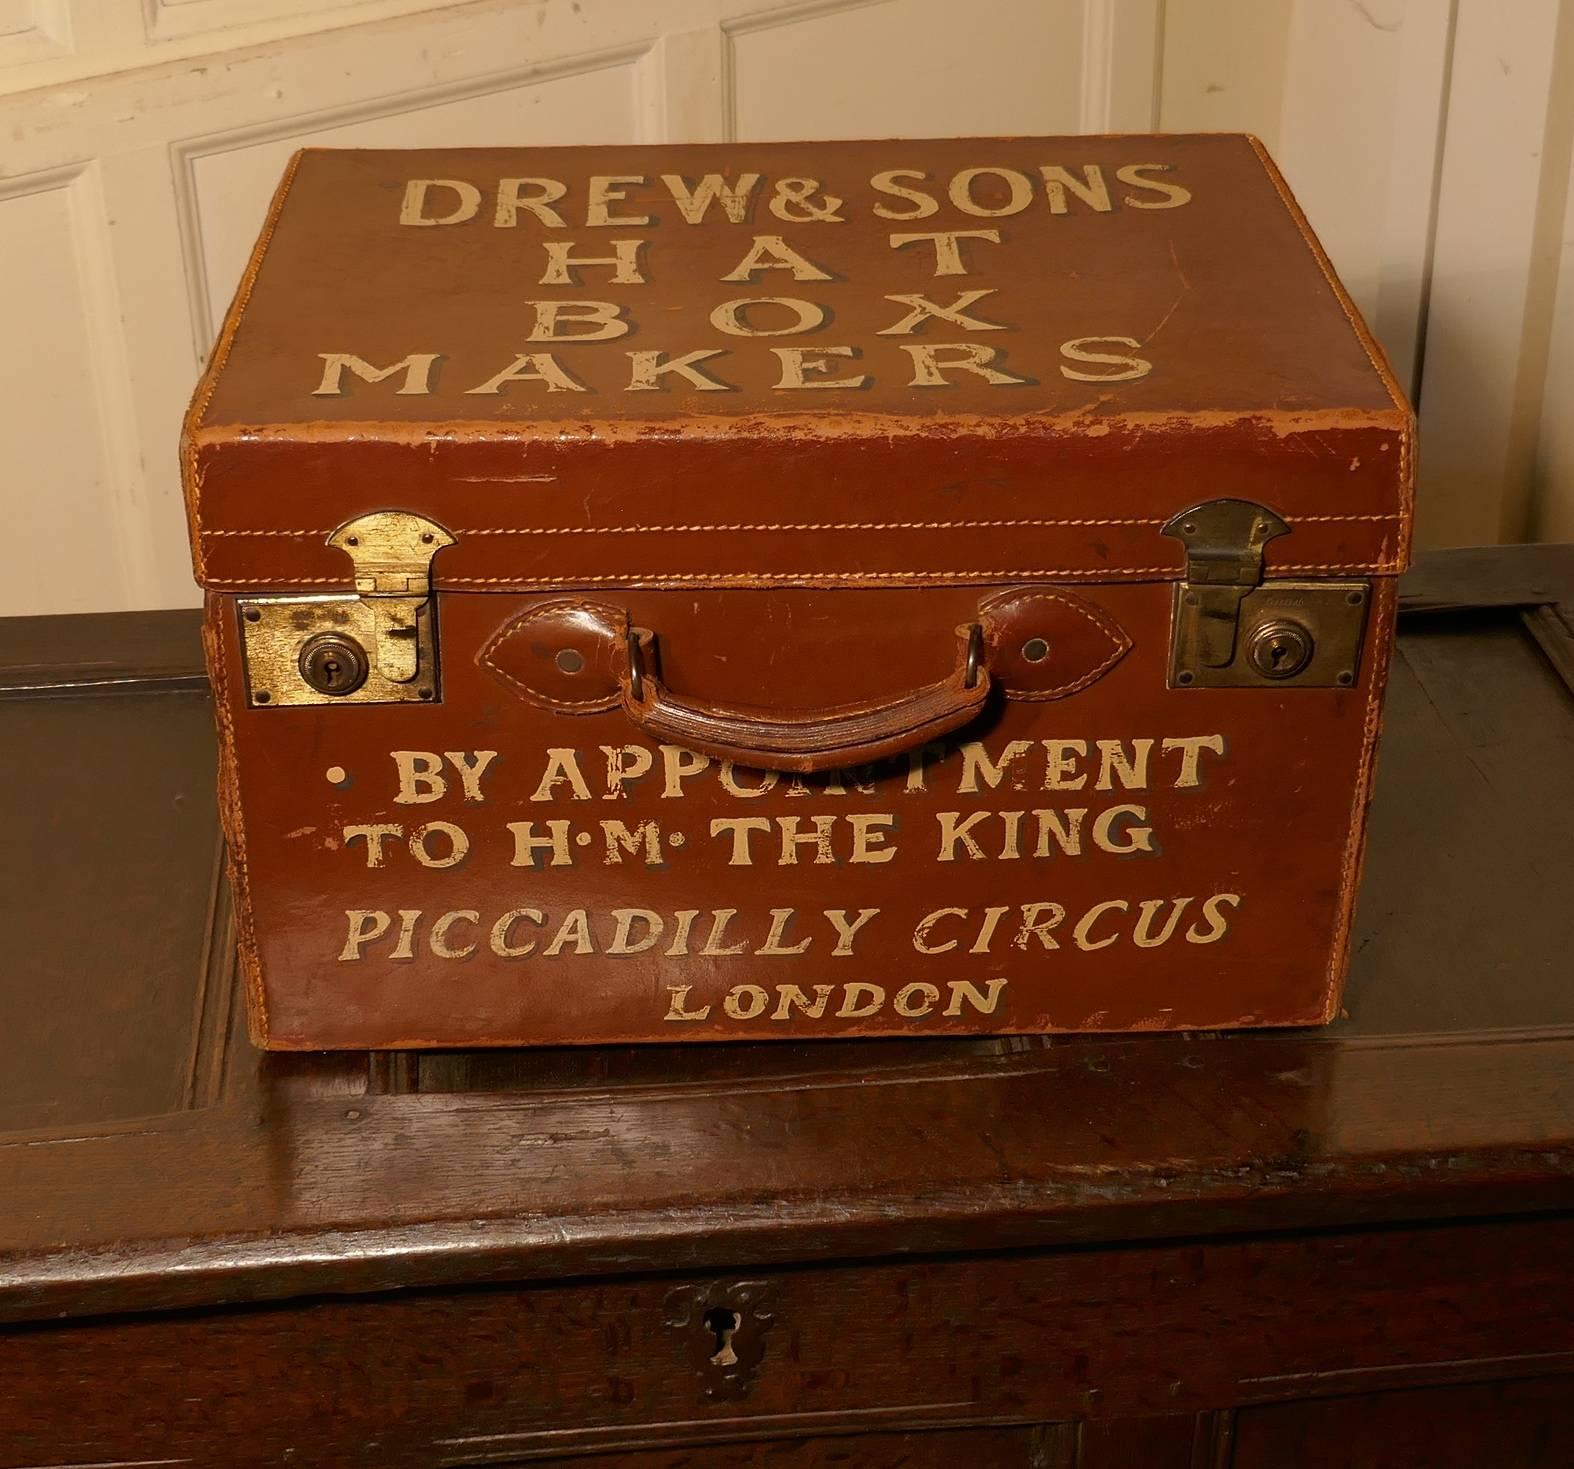 Salesman’s sample Edwardian leather hat box and hats, drew and sons trunk makers

This is a unique piece, it is a 19th century traveling salesman sample showing the quality of leather suitcases and luggage produced by Drew and Sons of